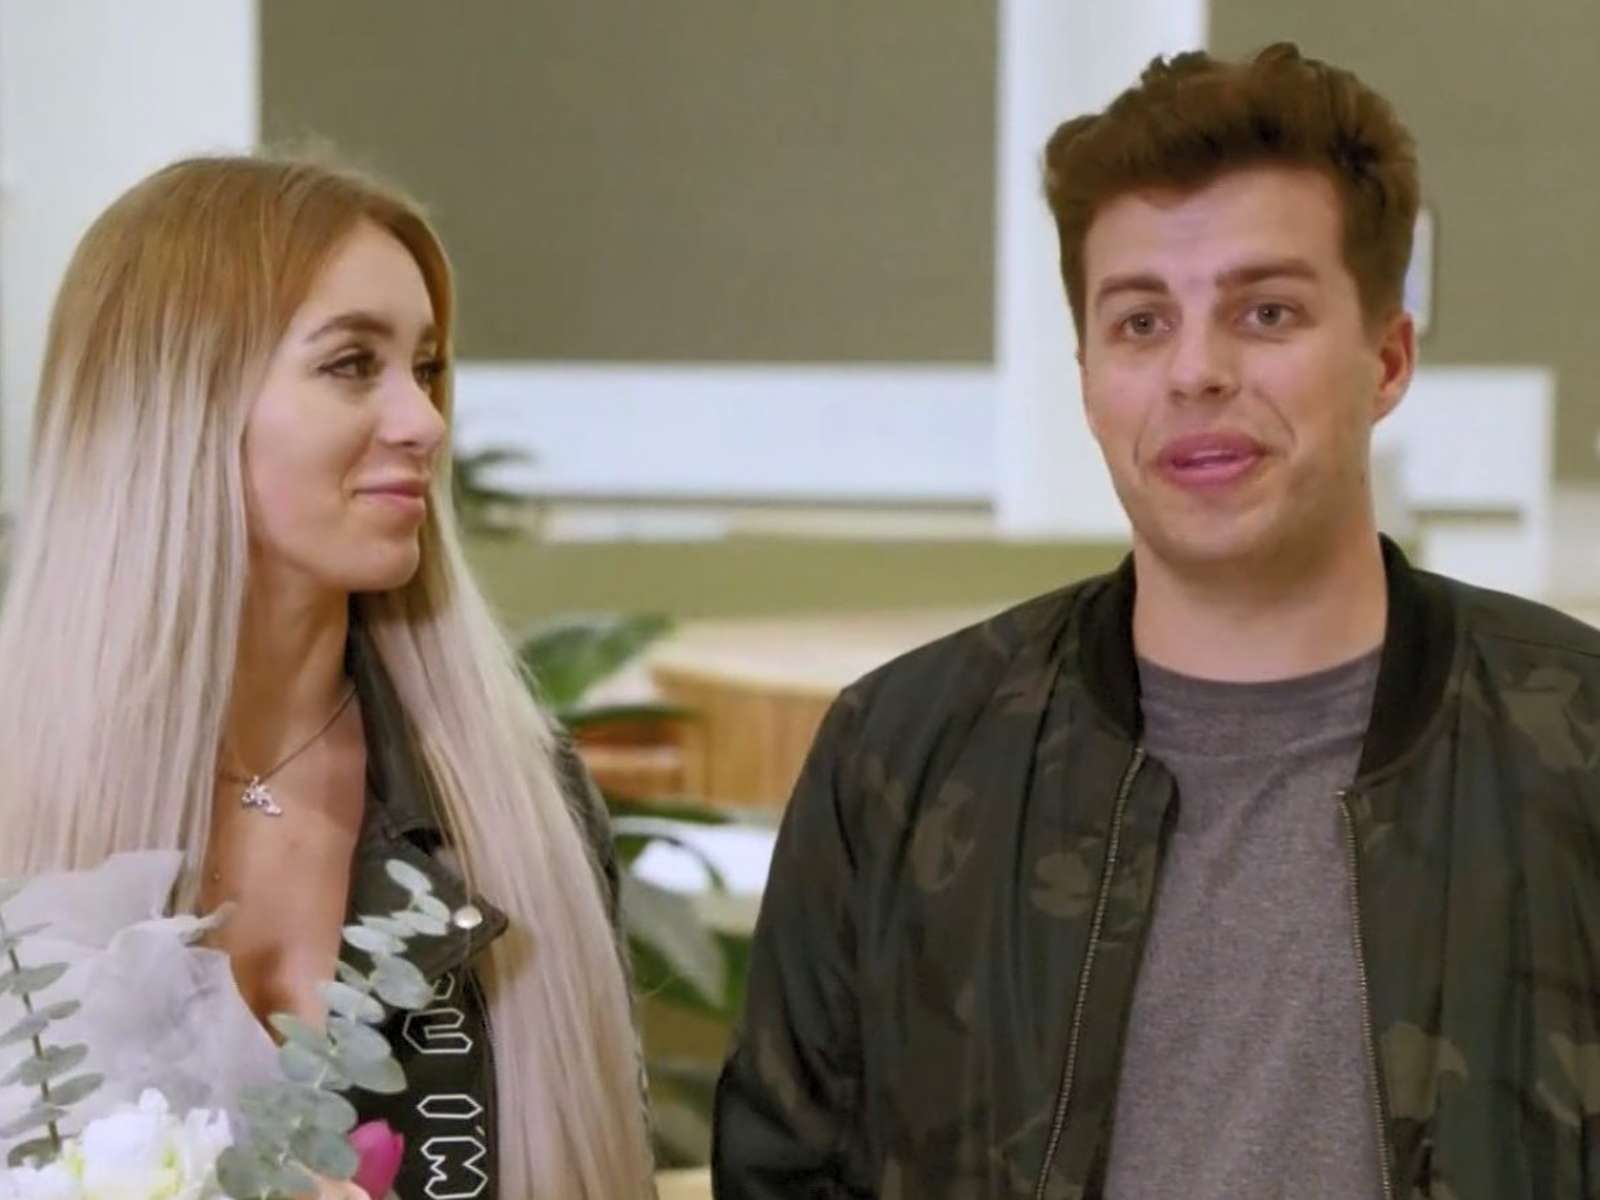 90 Day Fiance Spoilers Are Jovi Dufren And Yara Zaya Still Together Or Has The 90 Day Fiance 